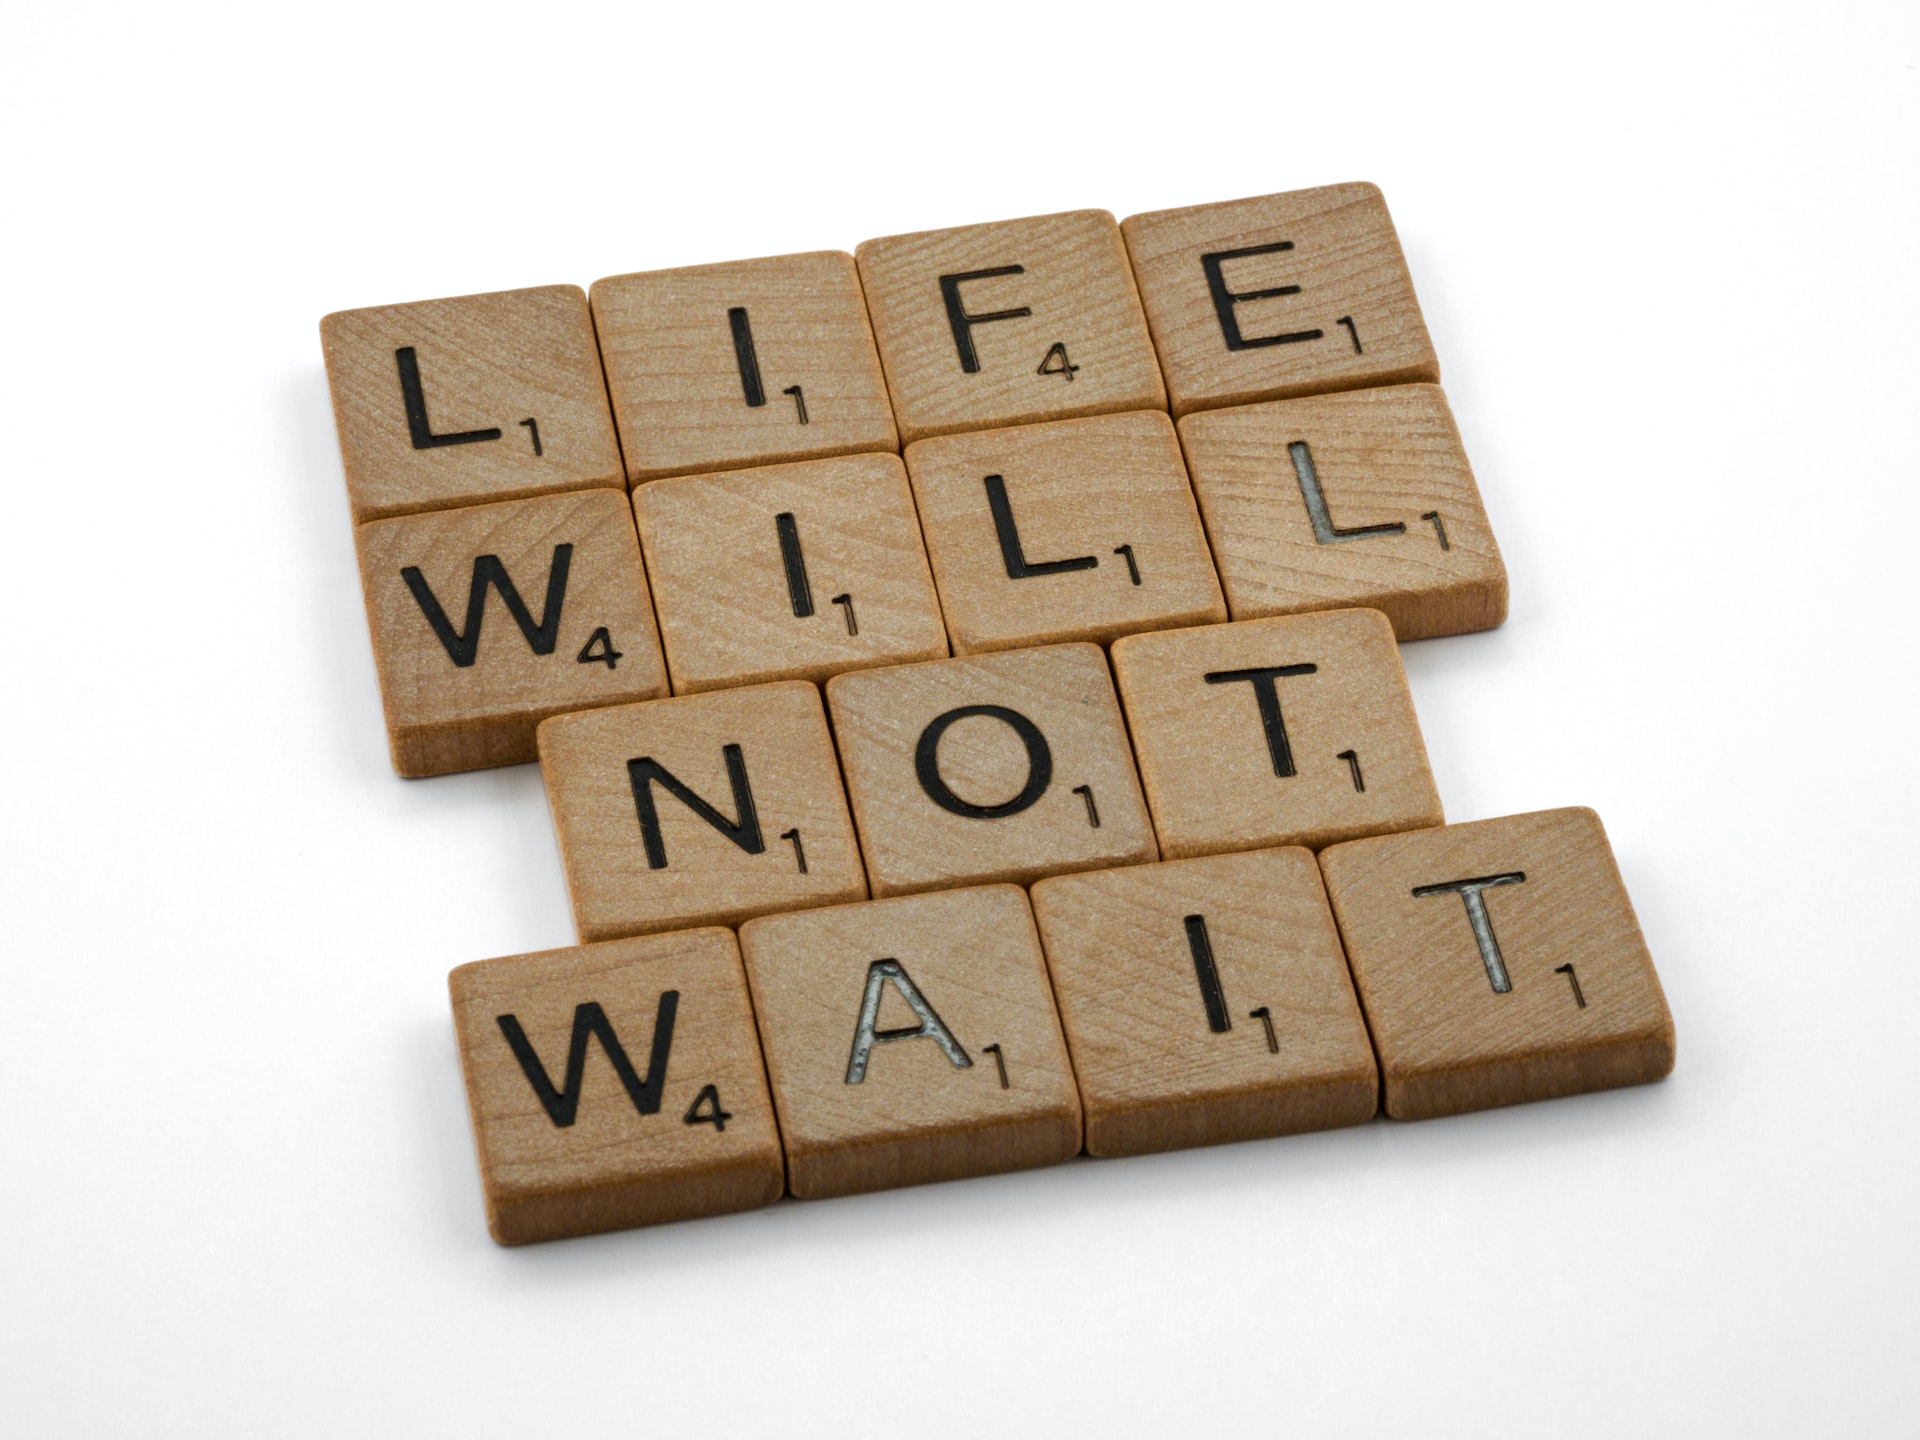 Life will not wait